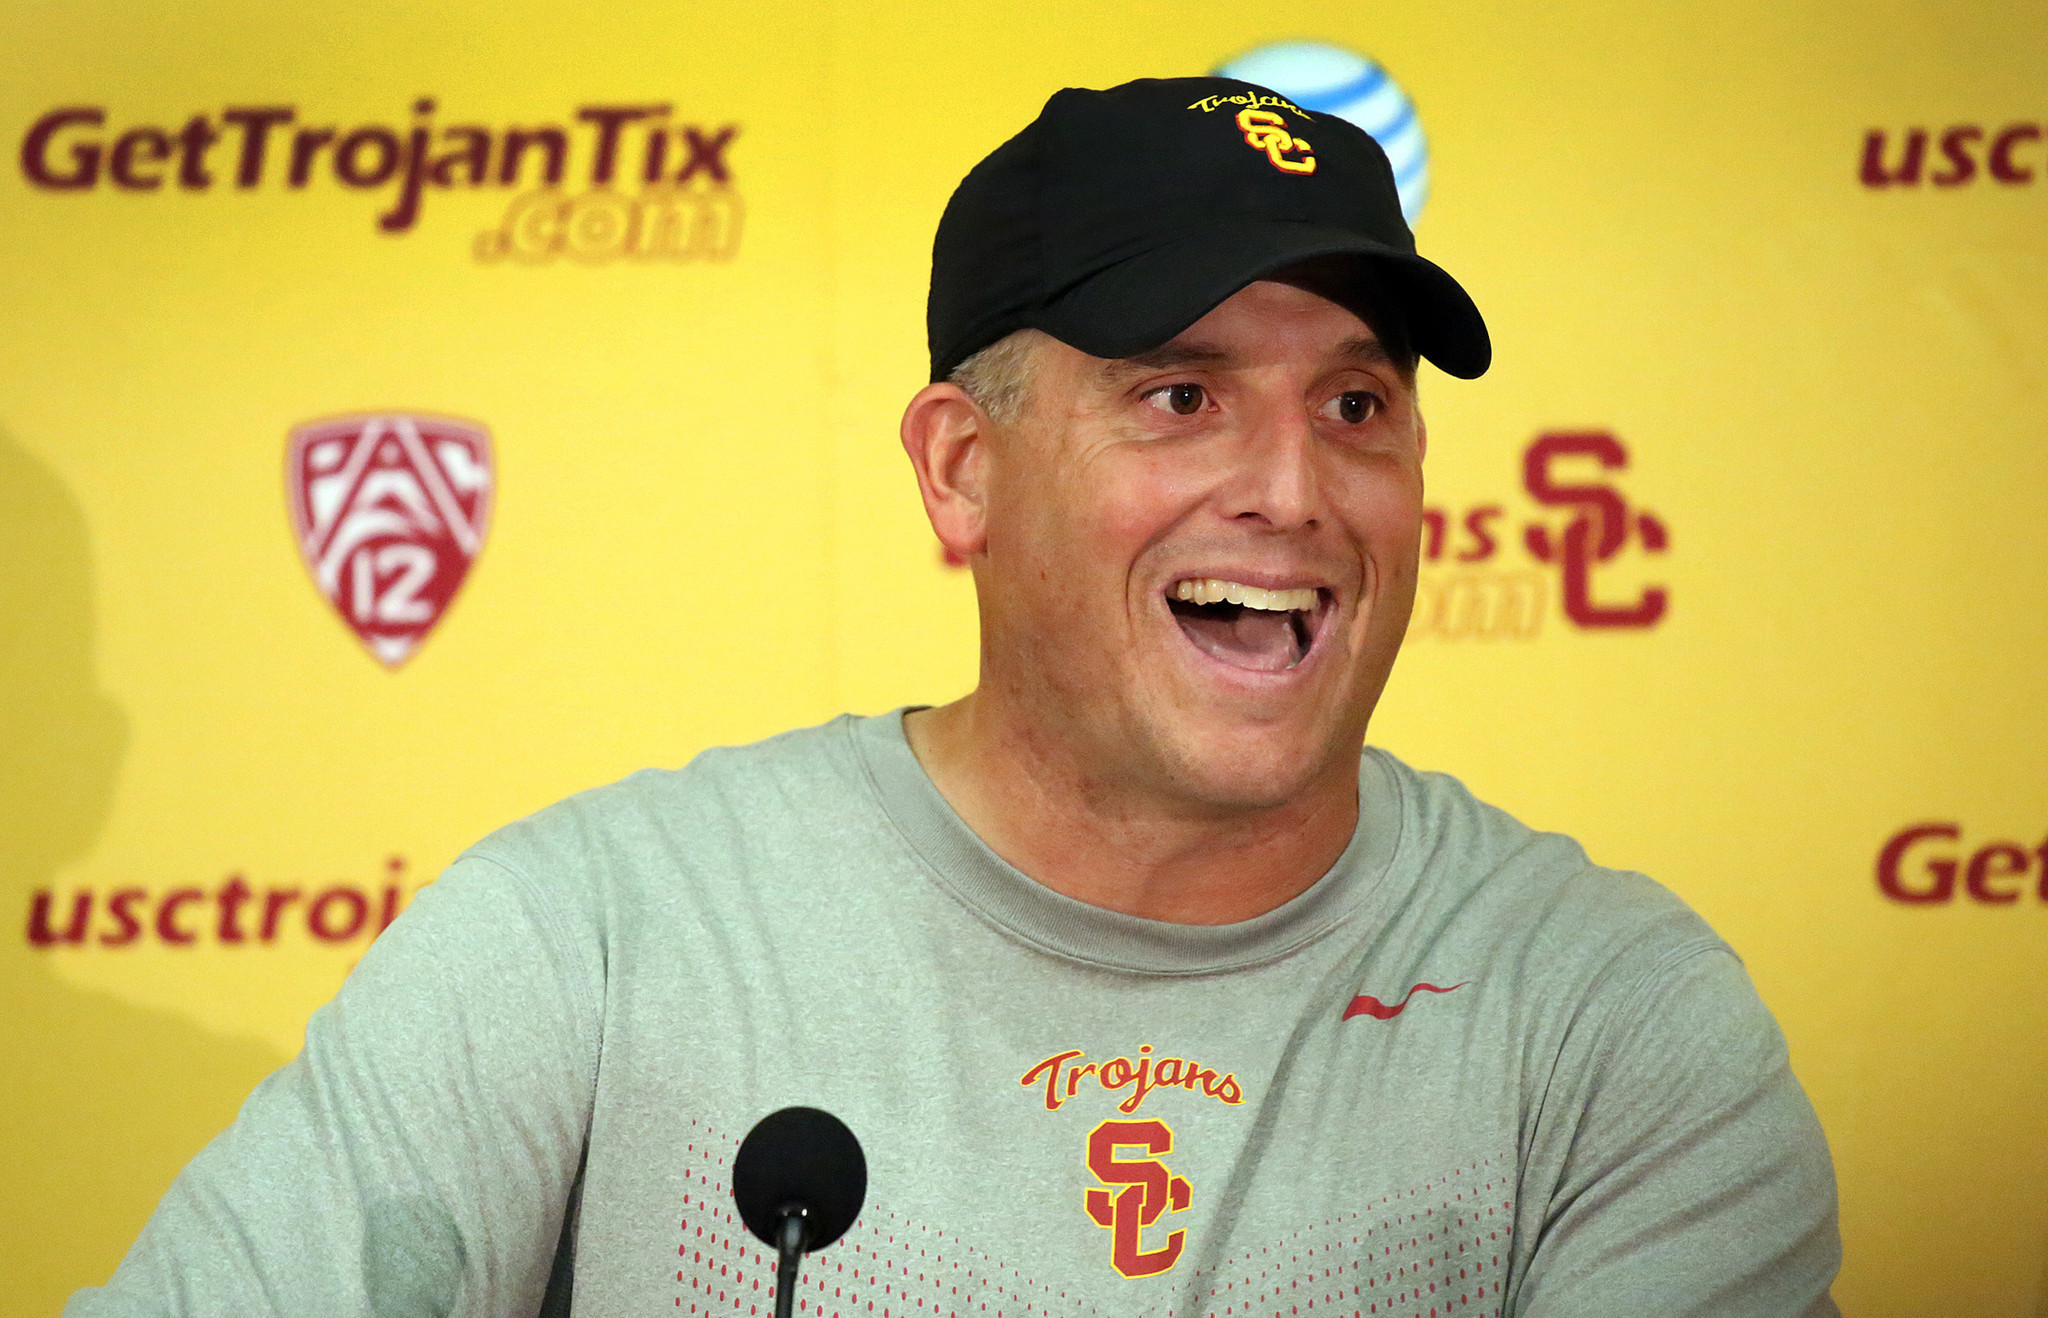 la-sp-usc-usc-now-mailbag-coaching-search-ucla-and-recruits-20151030